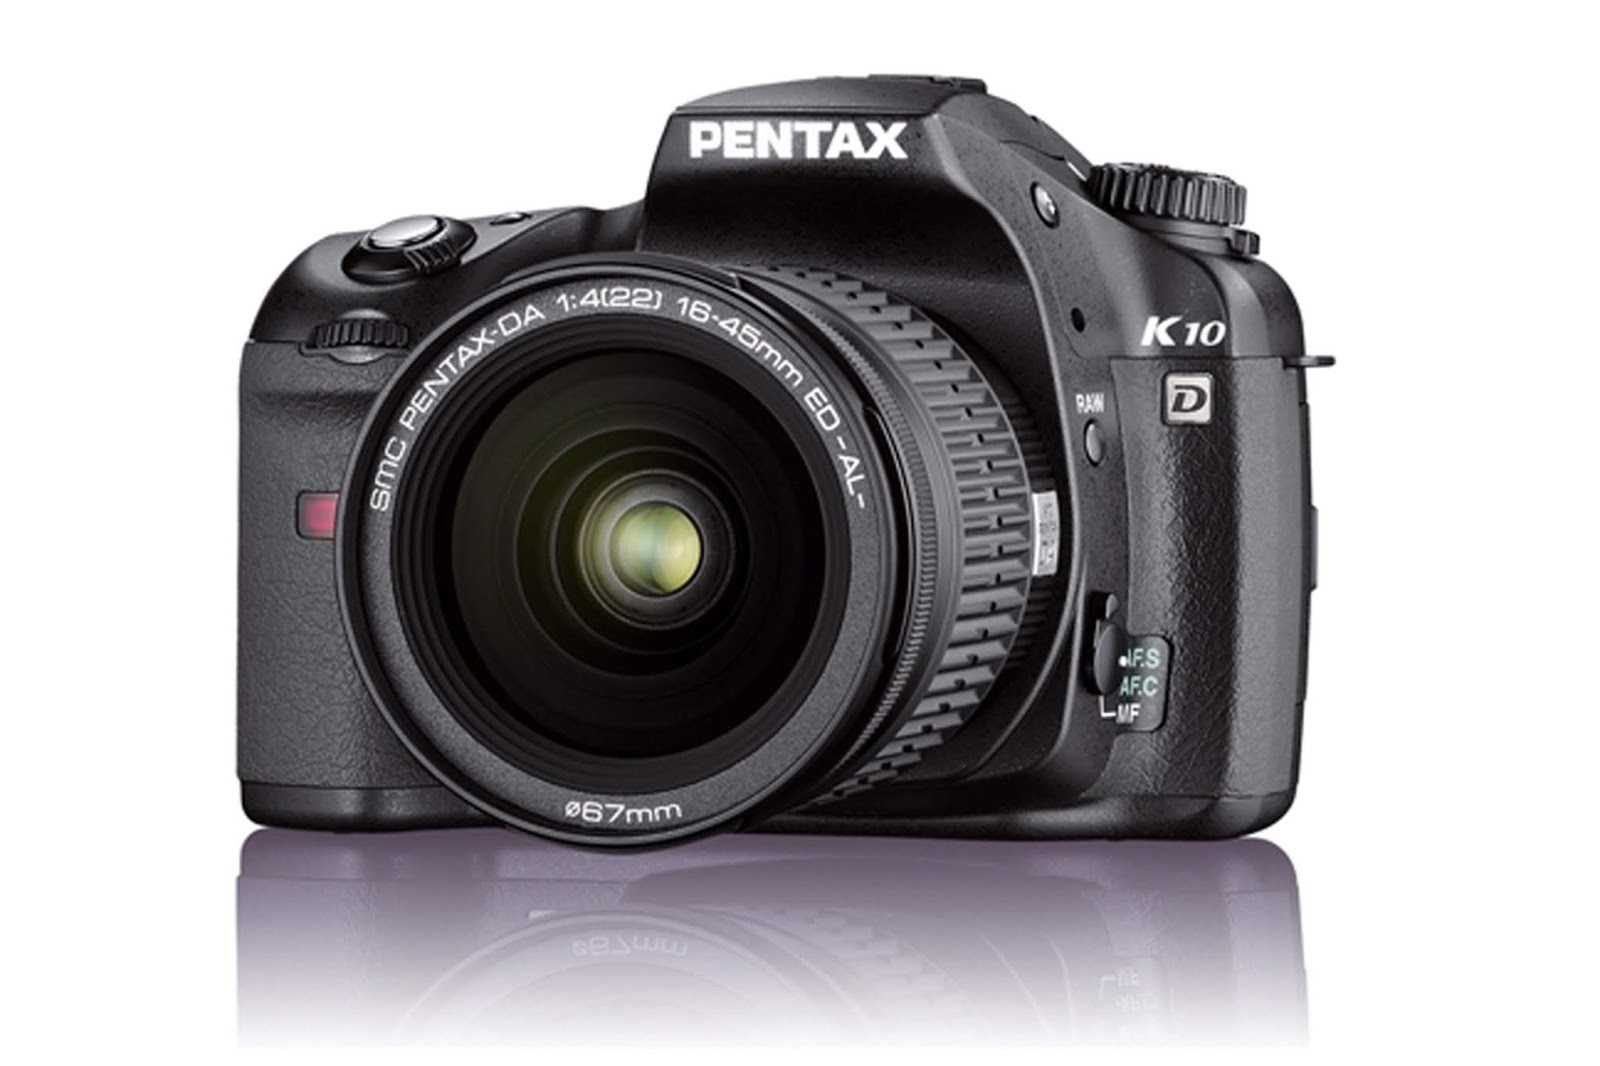 bekennen Artiest duizend PHOTOGRAPHIC CENTRAL: Pentax K10D- Revisiting Simpler and Practical  Photography